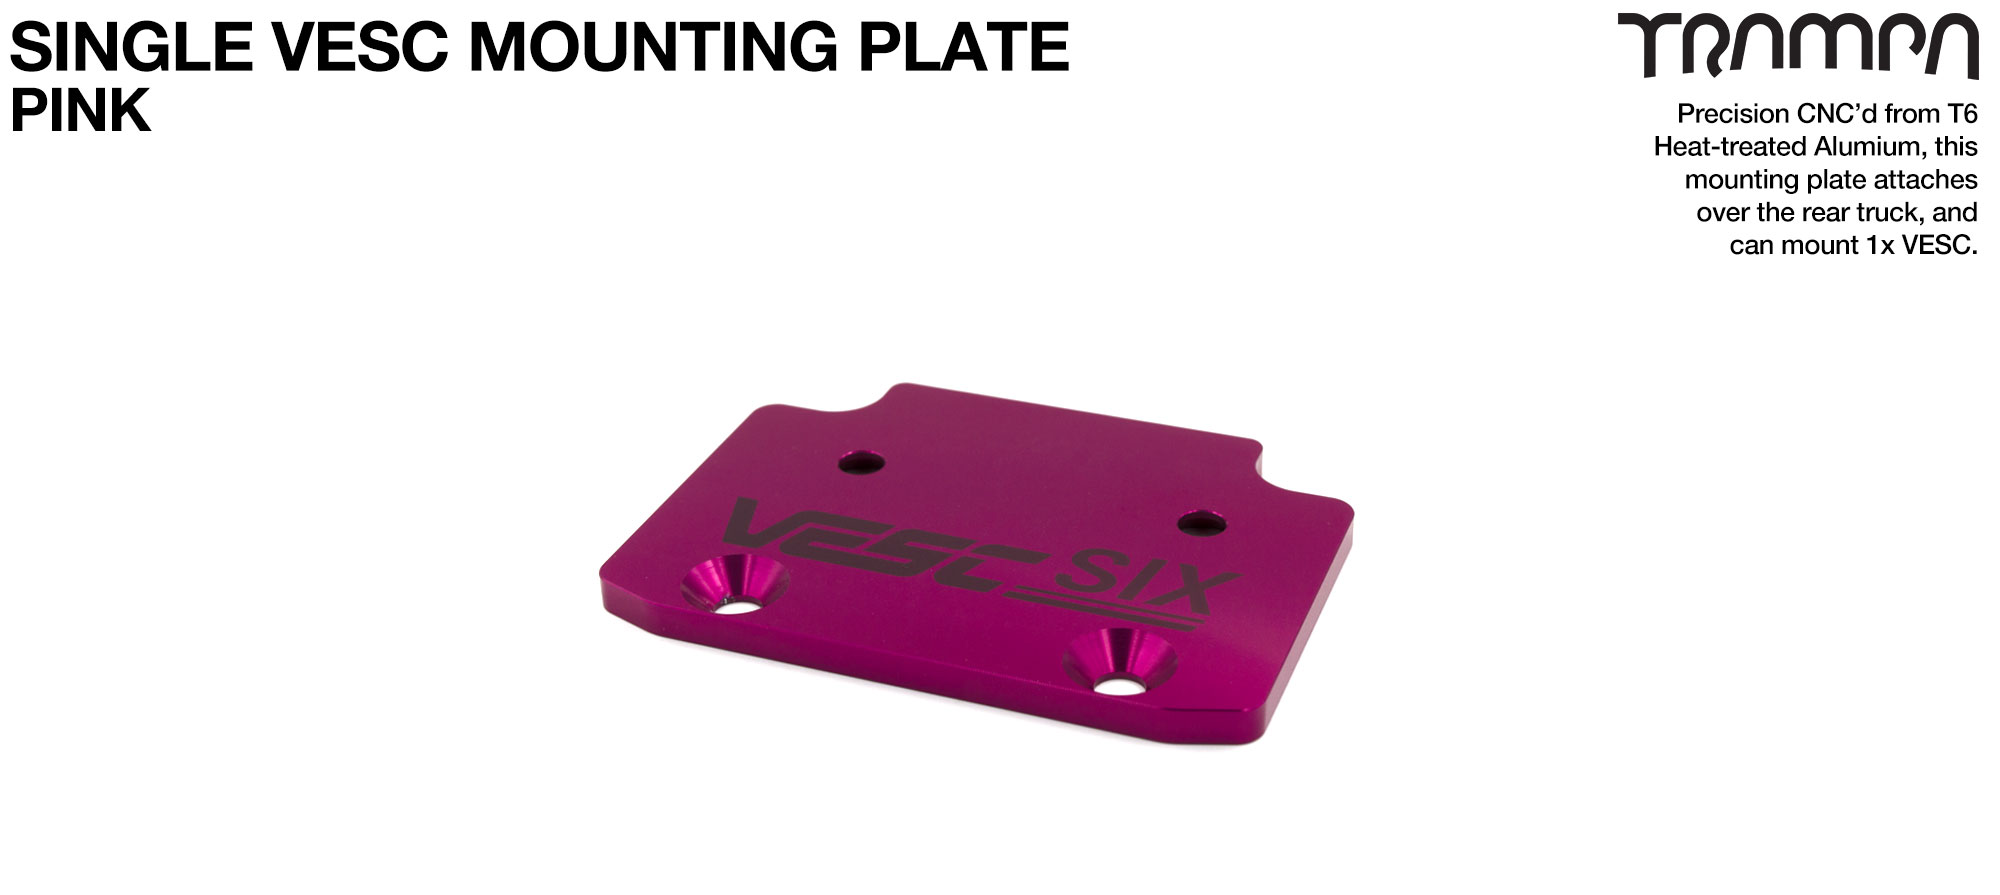 ALUMINIUM Mounting Plate for 1x VESC 6 & Fixing Bolts - PINK 